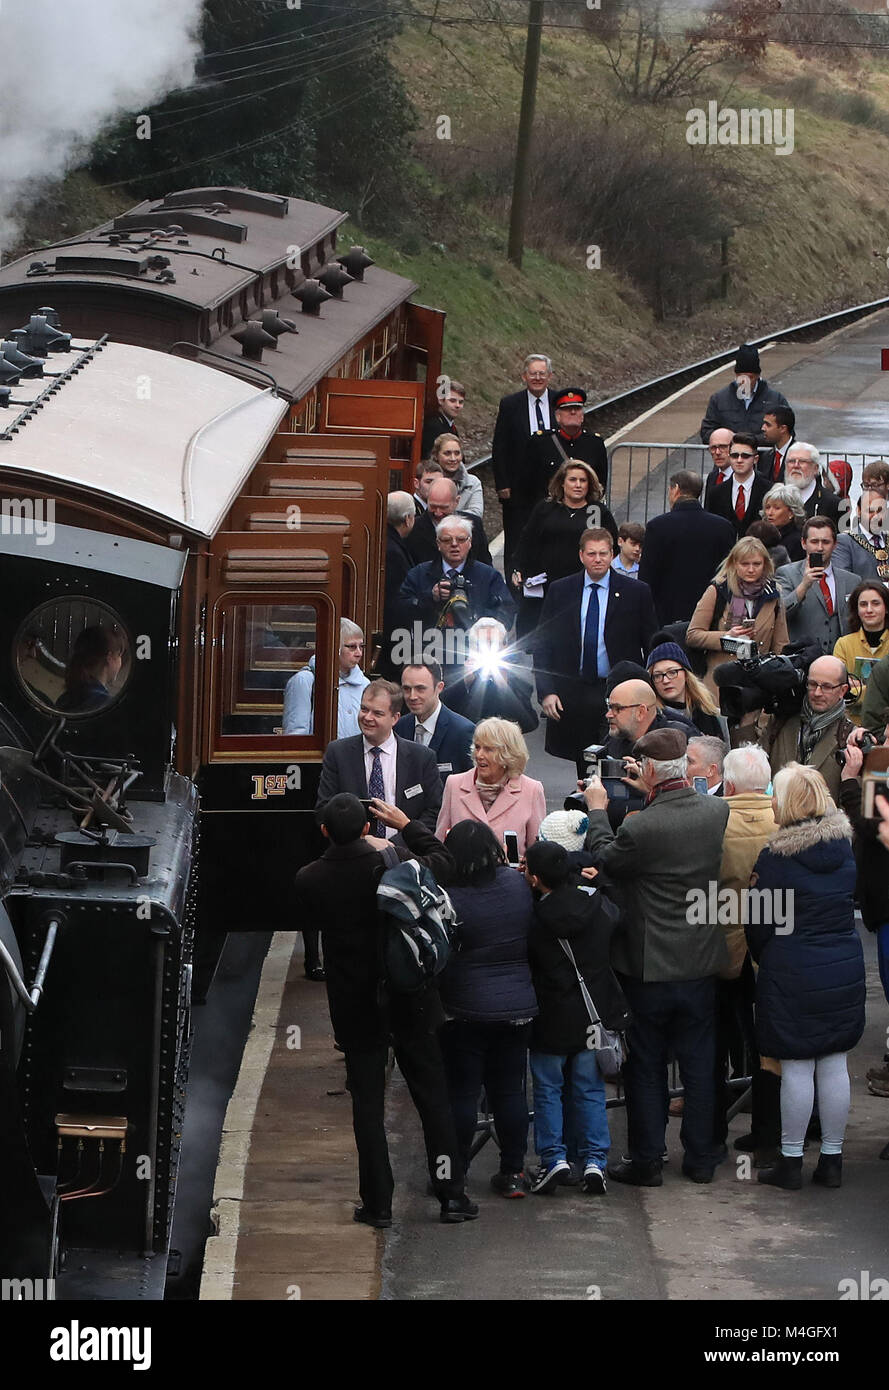 The Duchess of Cornwall boards a steam train at The Railway Station in Haworth. Stock Photo